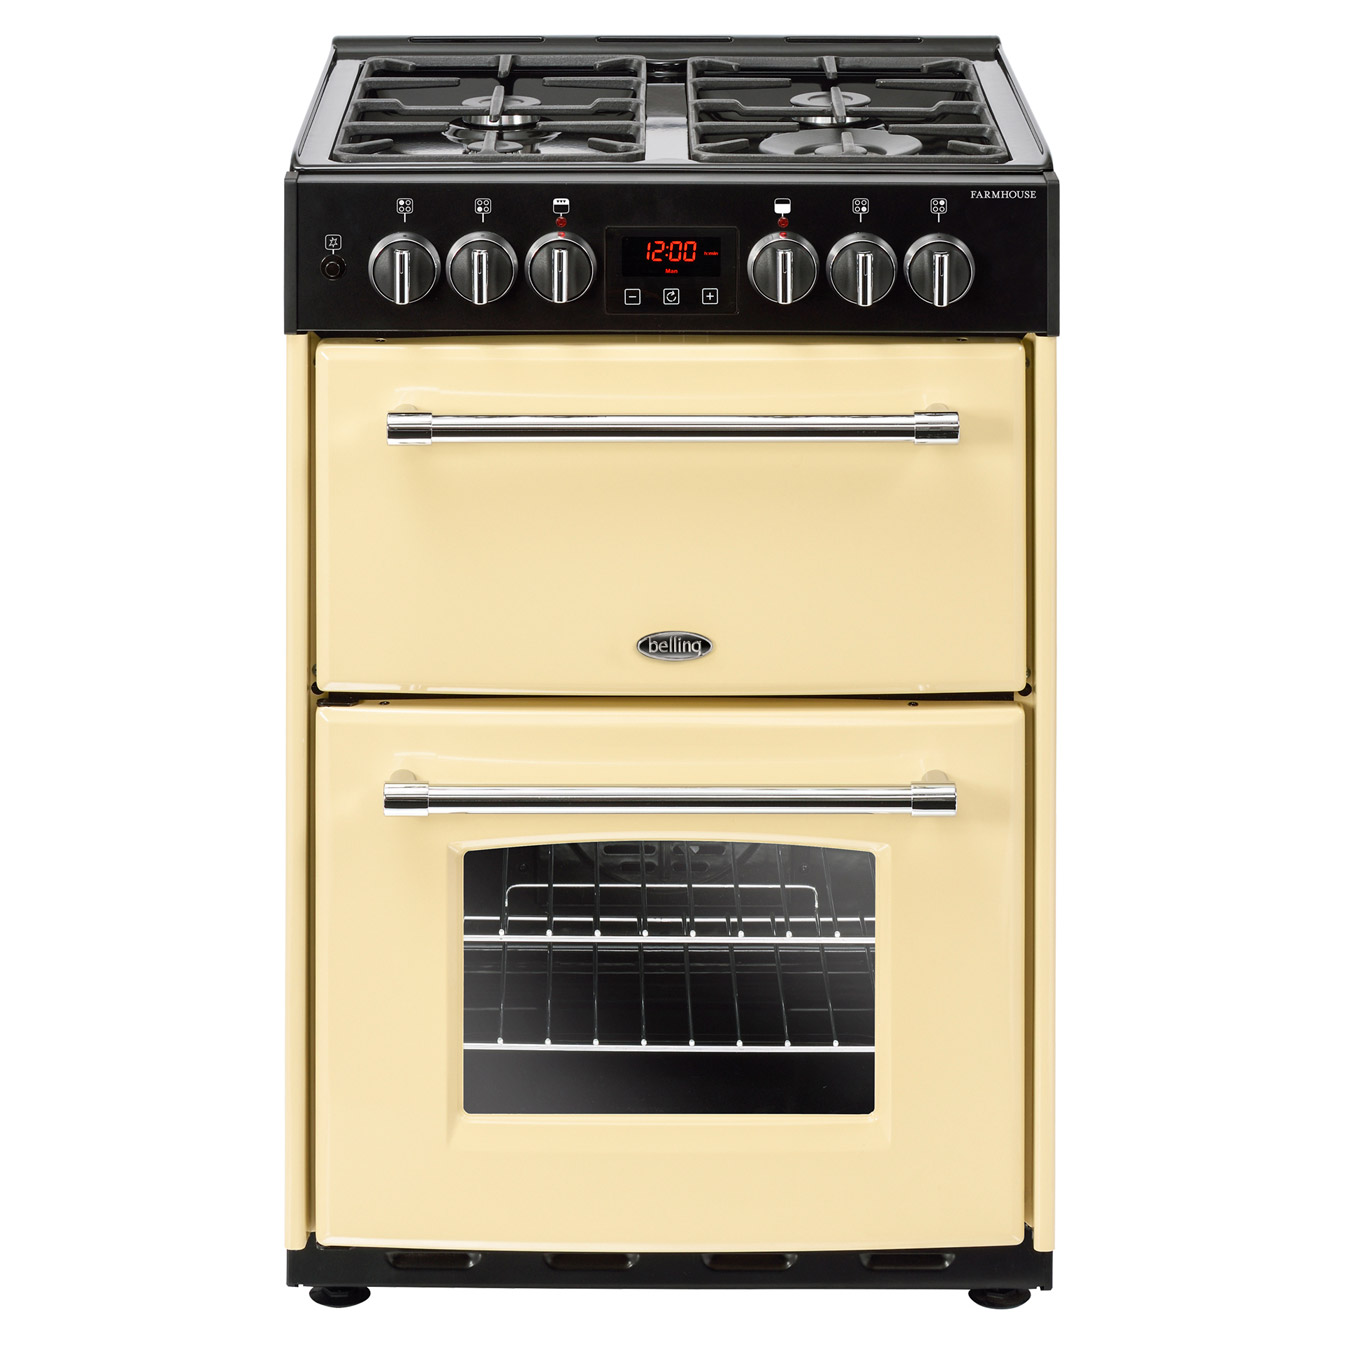 Image of Belling 444444713 60cm Farmhouse 60DF D Oven Dual Fuel Cooker in Cream